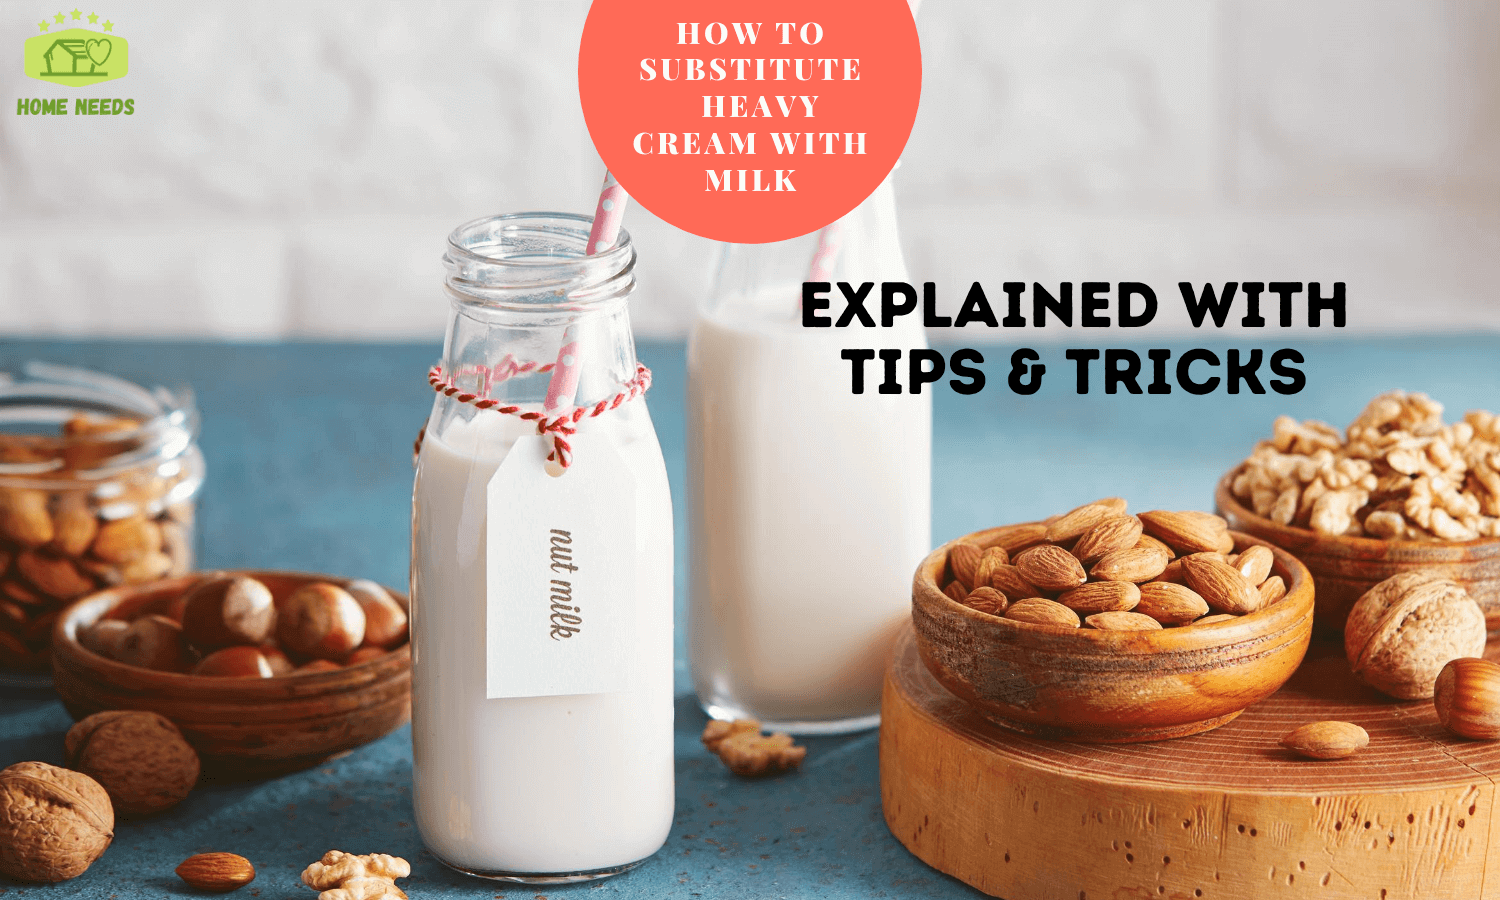 How to Substitute Heavy Cream with Milk